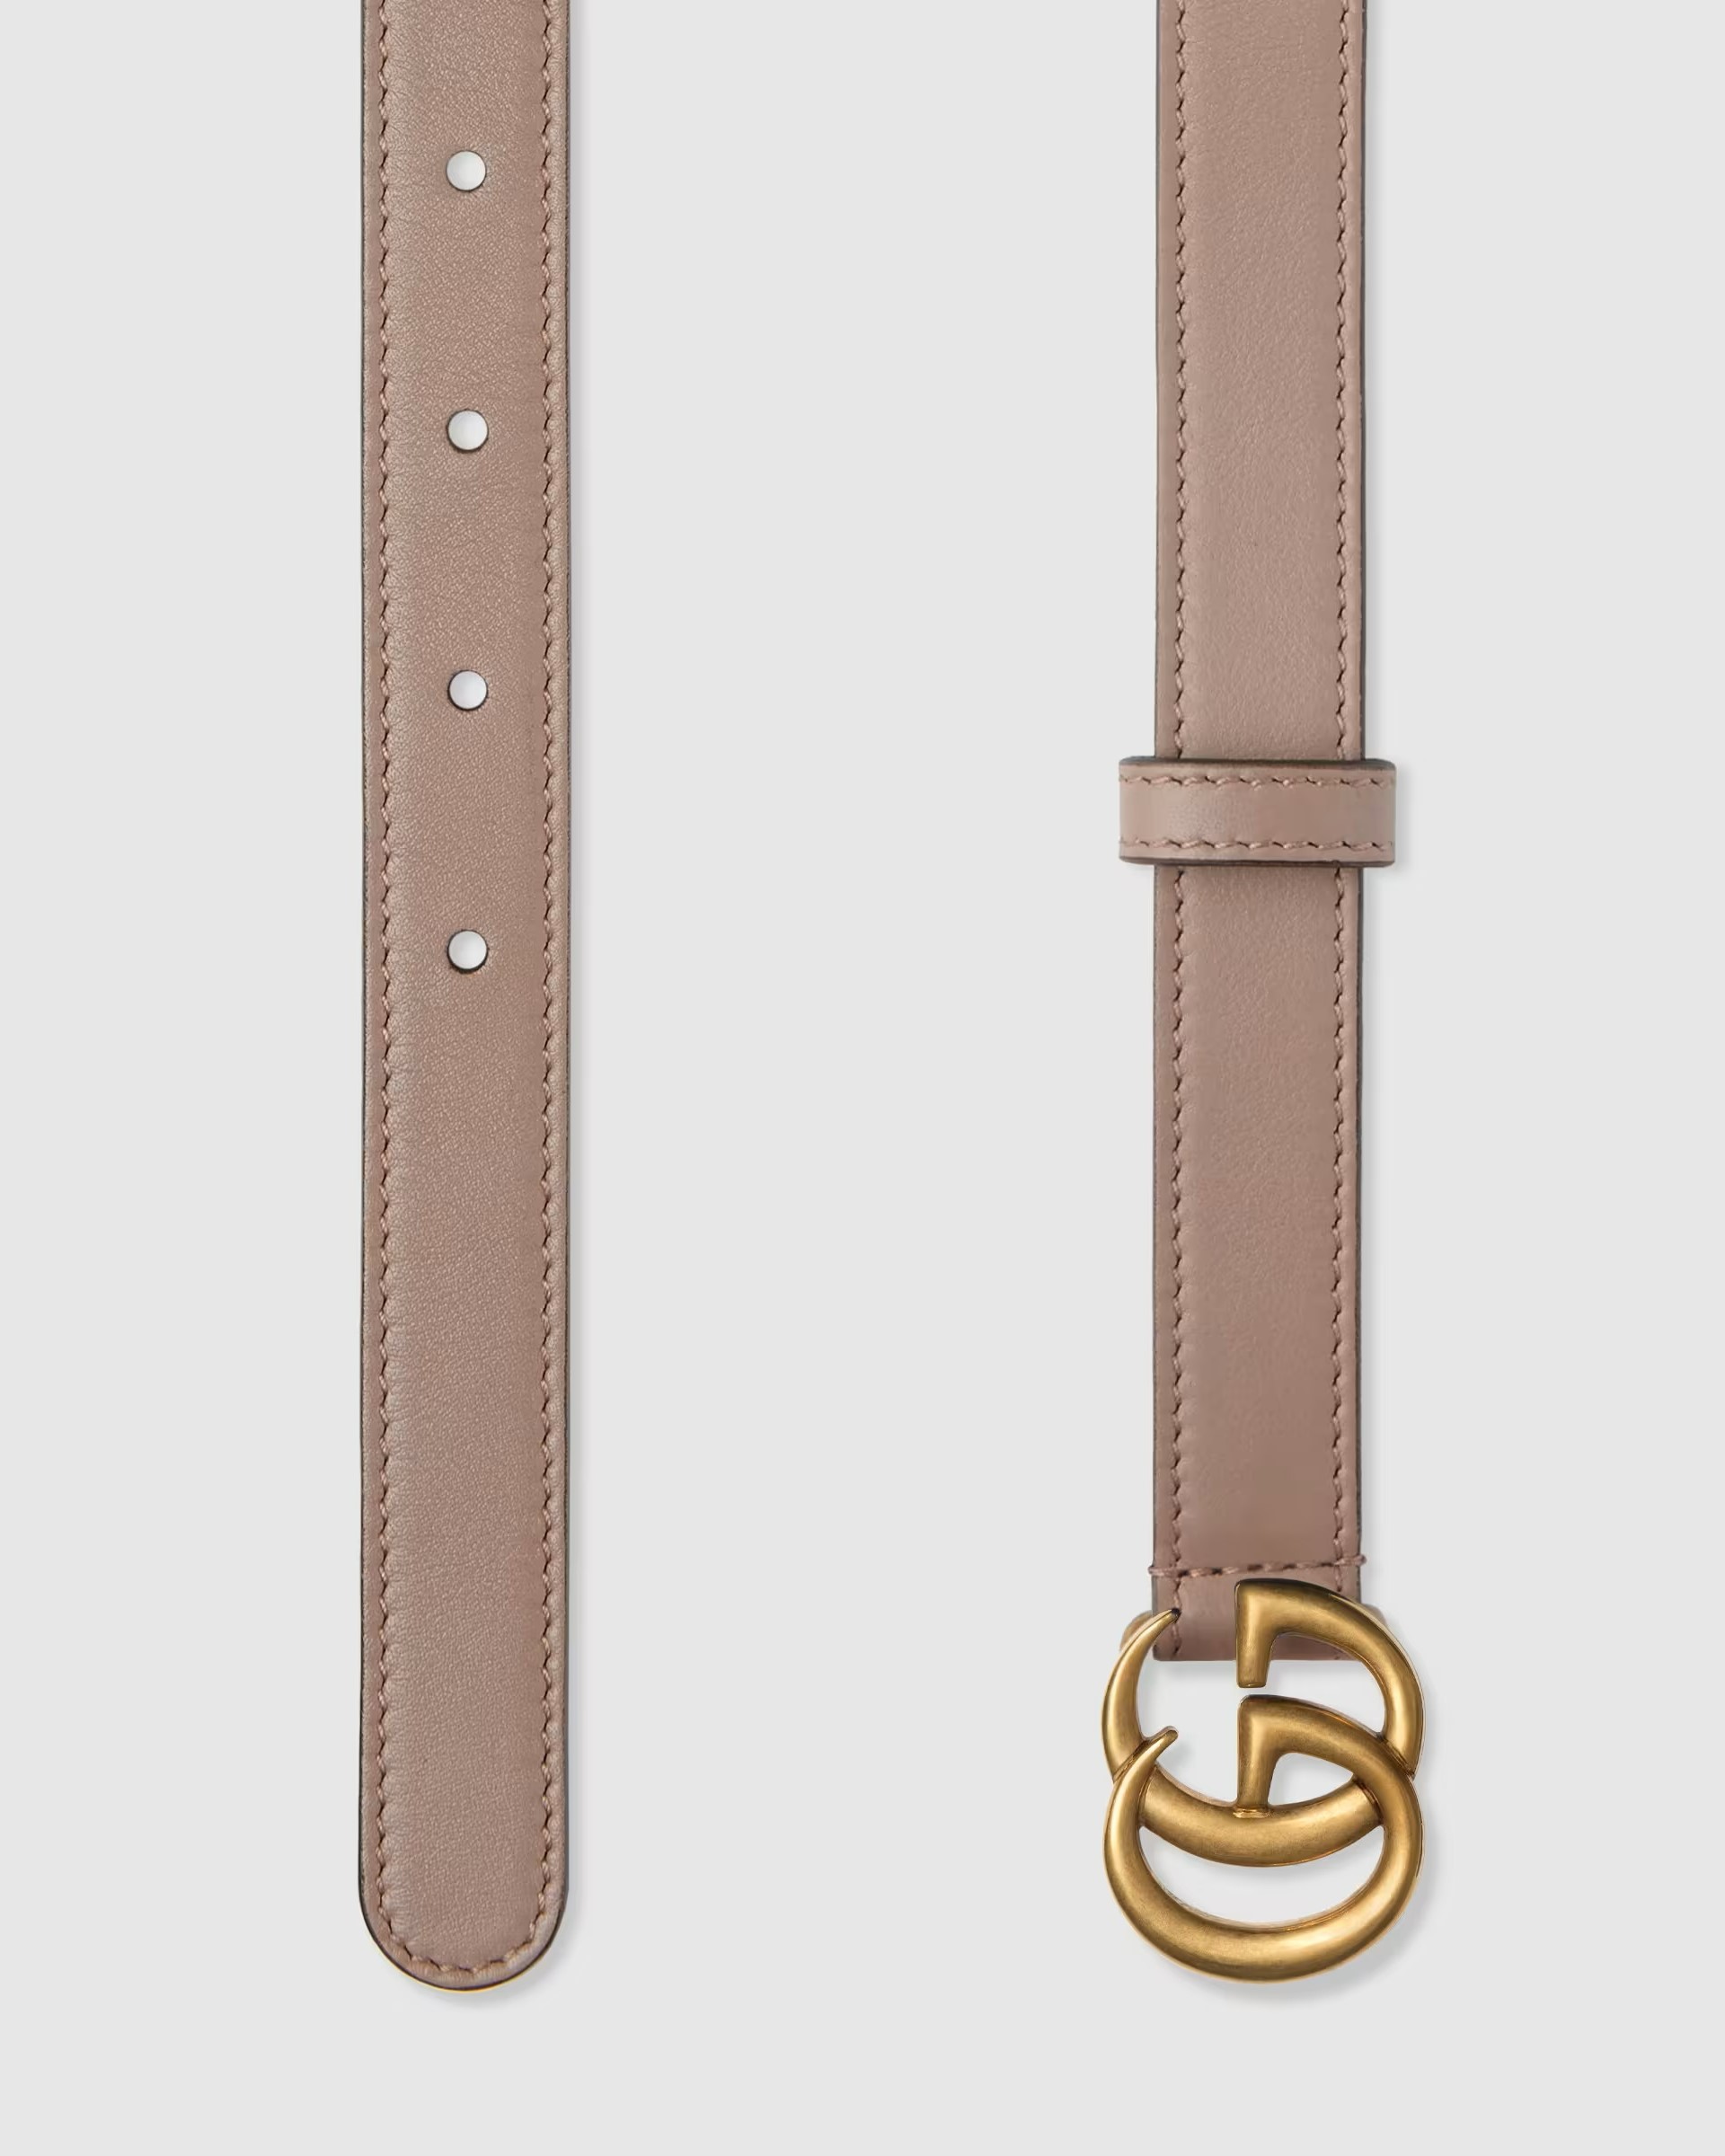 DÂY LƯNG GUCCI LIGHT LEATHER BELT WITH DOUBLE G BUCKLE 17